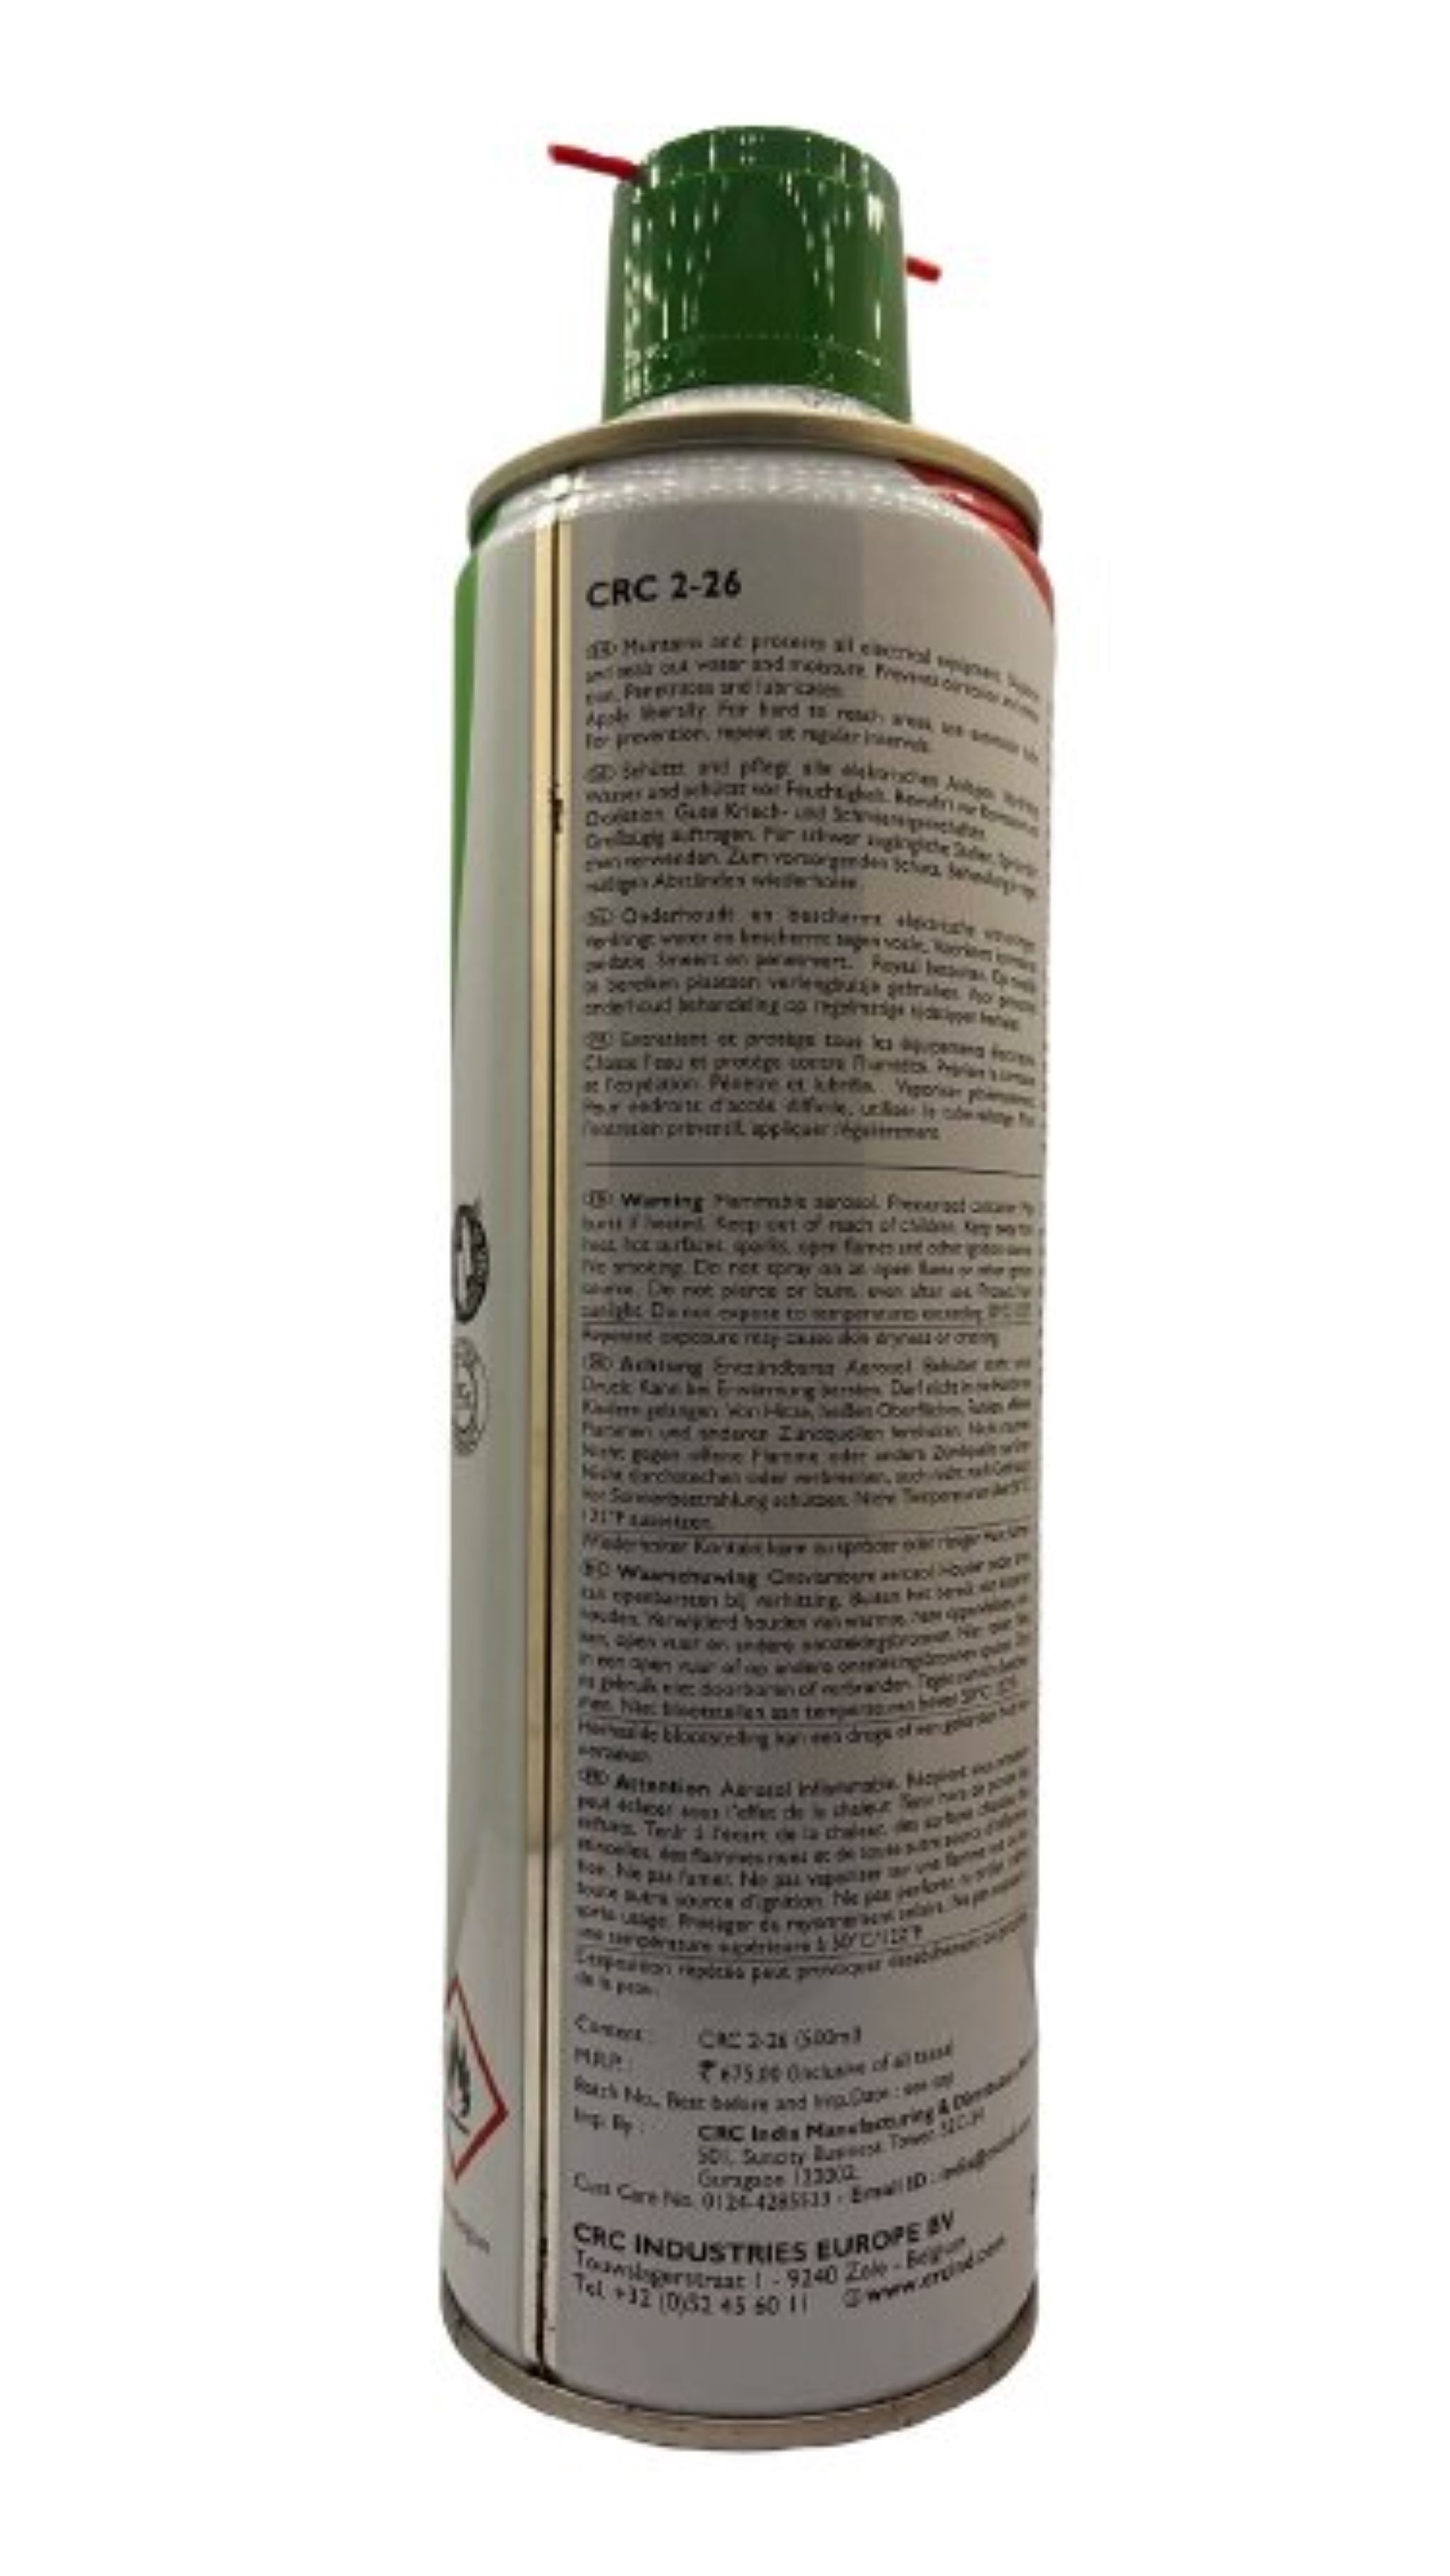 CRC 2-26 Electrical Contact Cleaner Spray